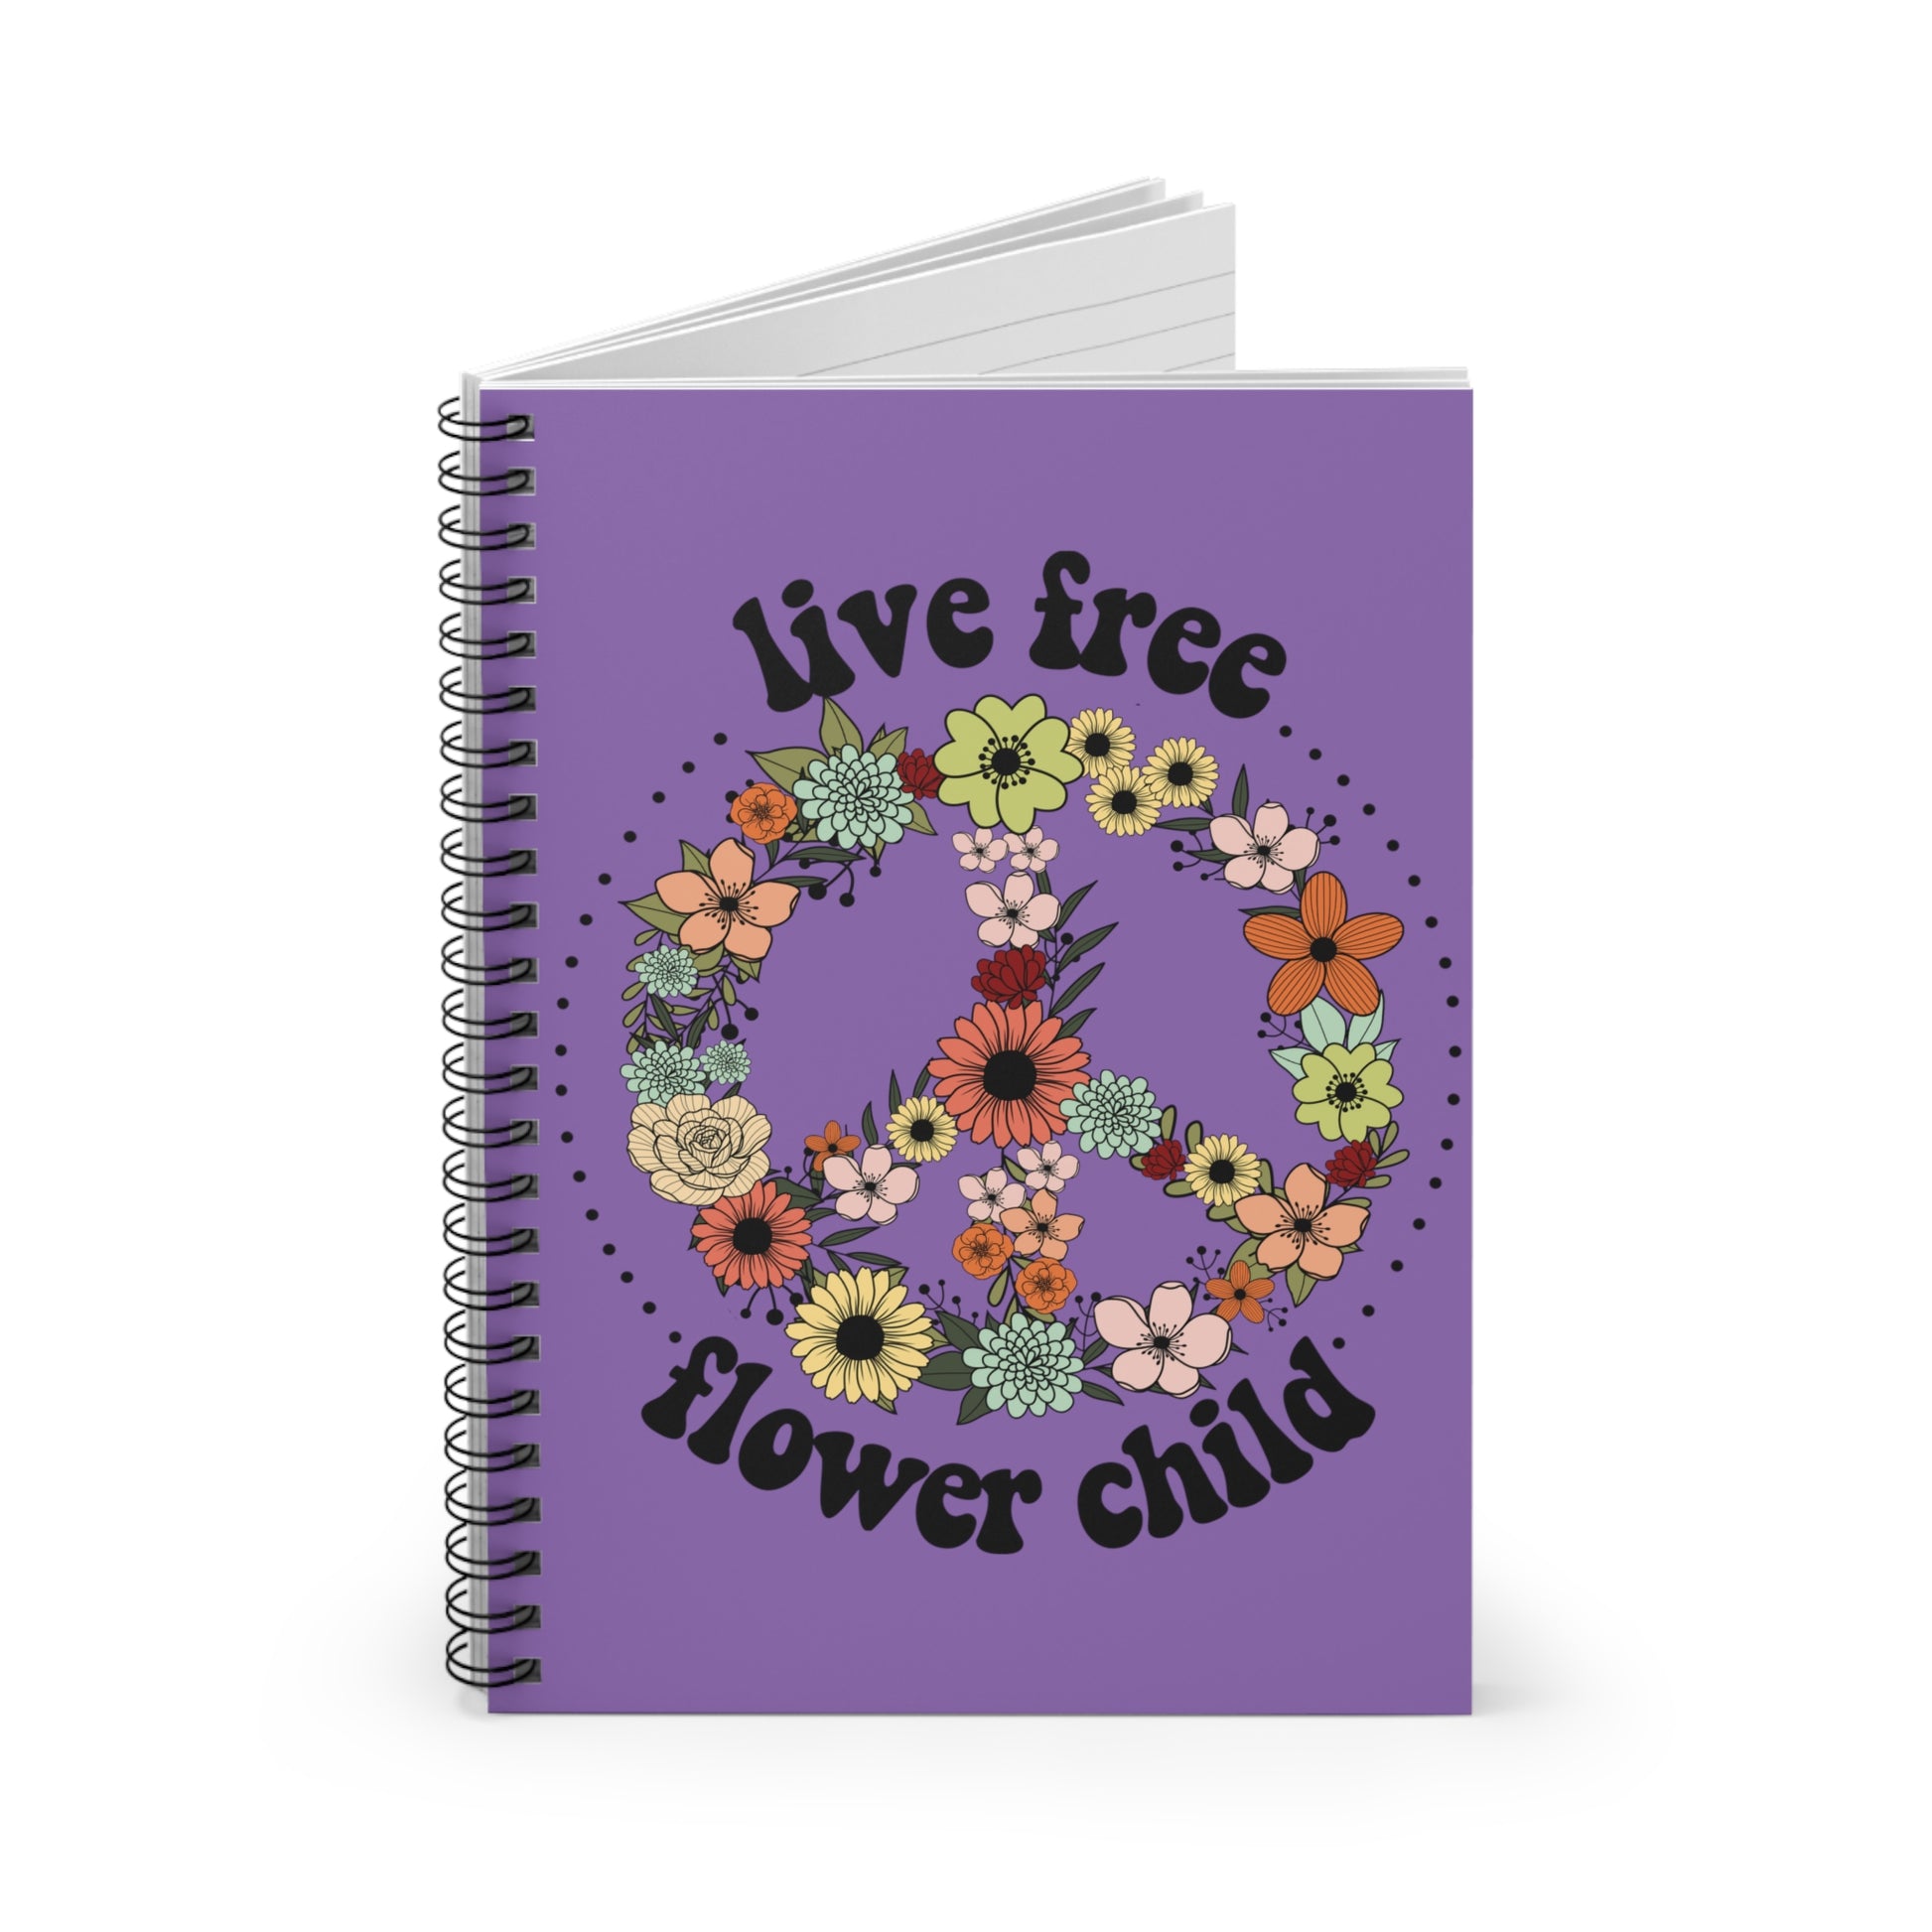 Live Free Flower Child: Spiral Notebook - Log Books - Journals - Diaries - and More Custom Printed by TheGlassyLass